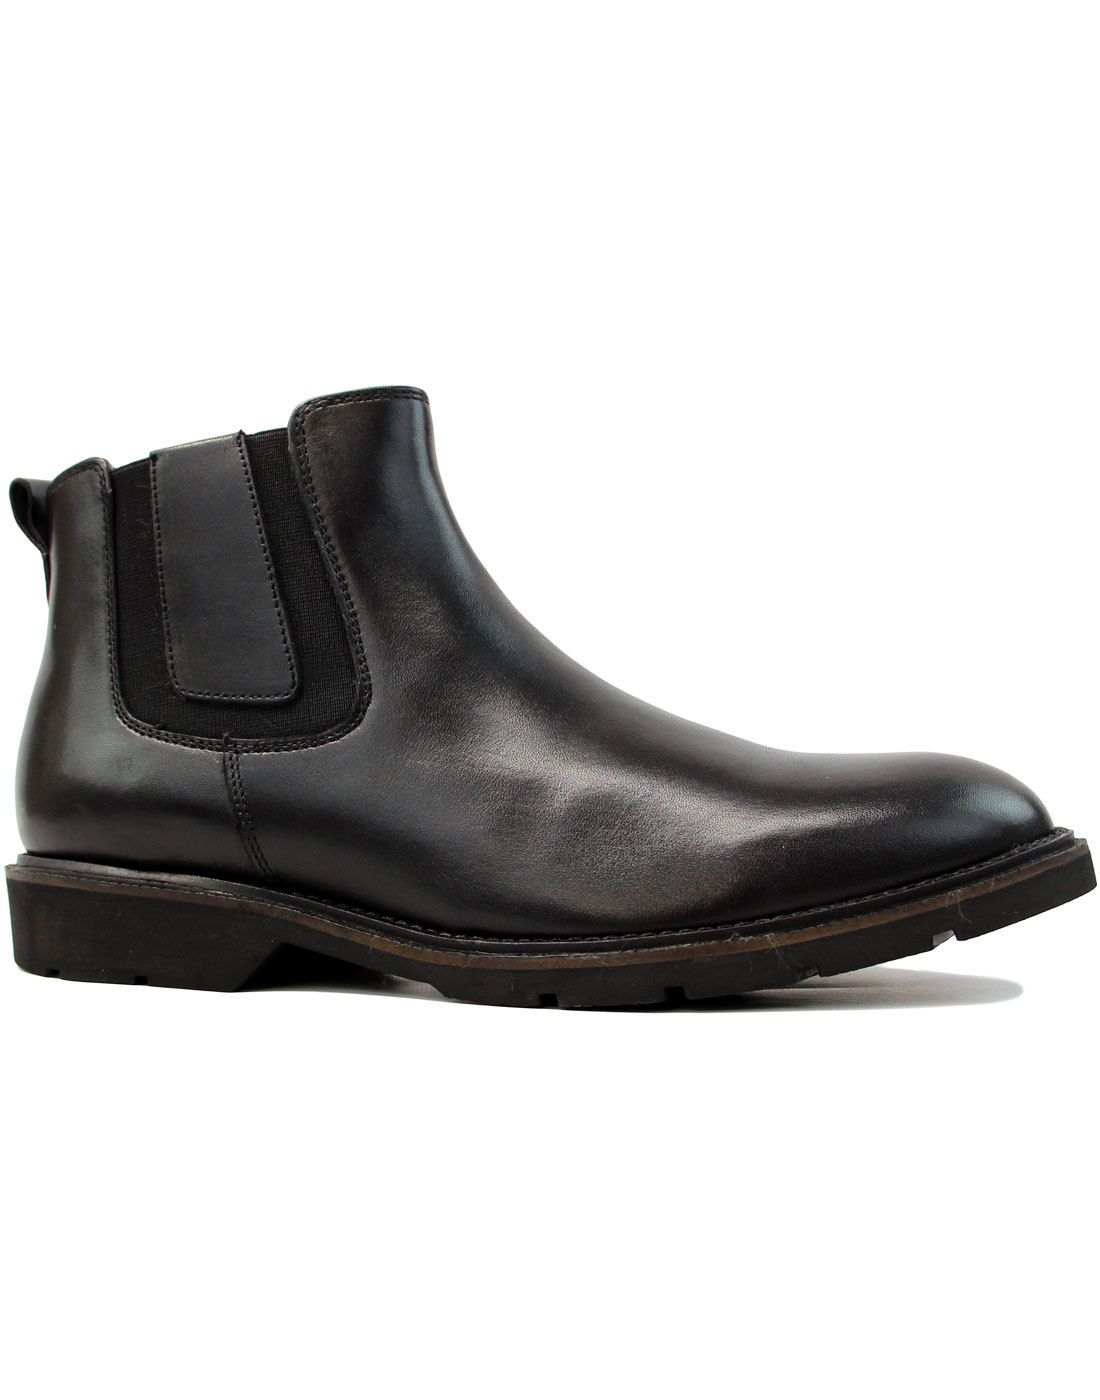 Rider Men's Retro 60s Mod Smooth Leather Chelsea Boots in Black